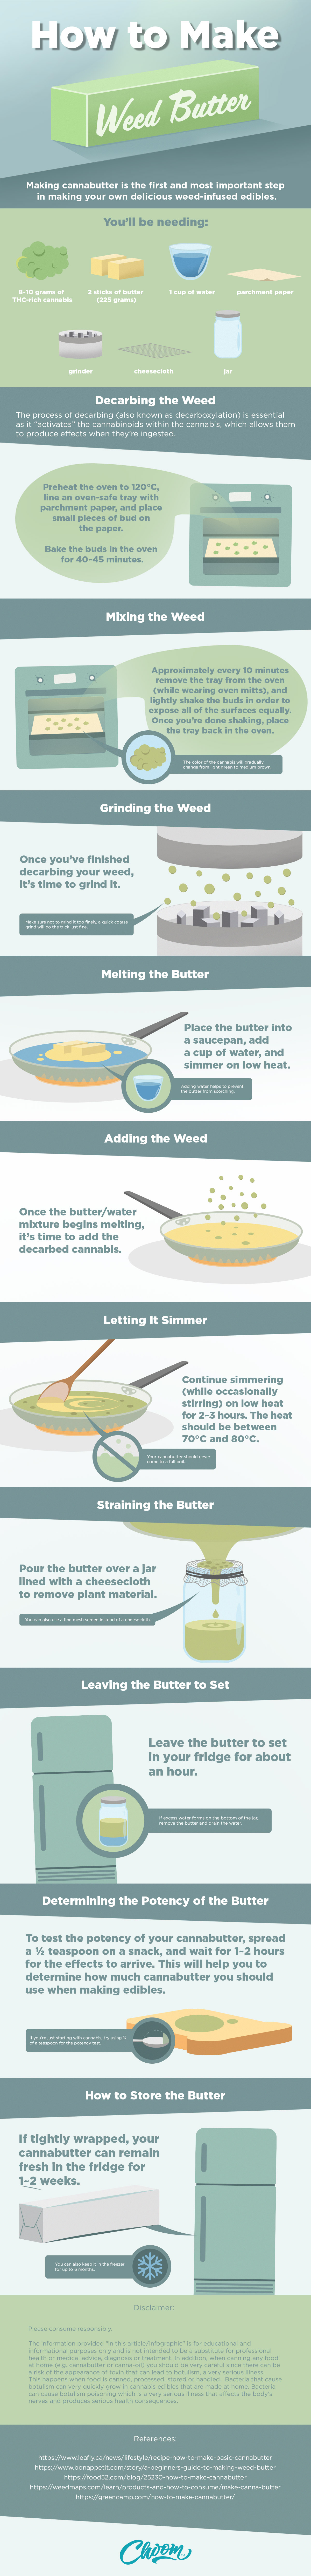 How to make cannabutter infographic